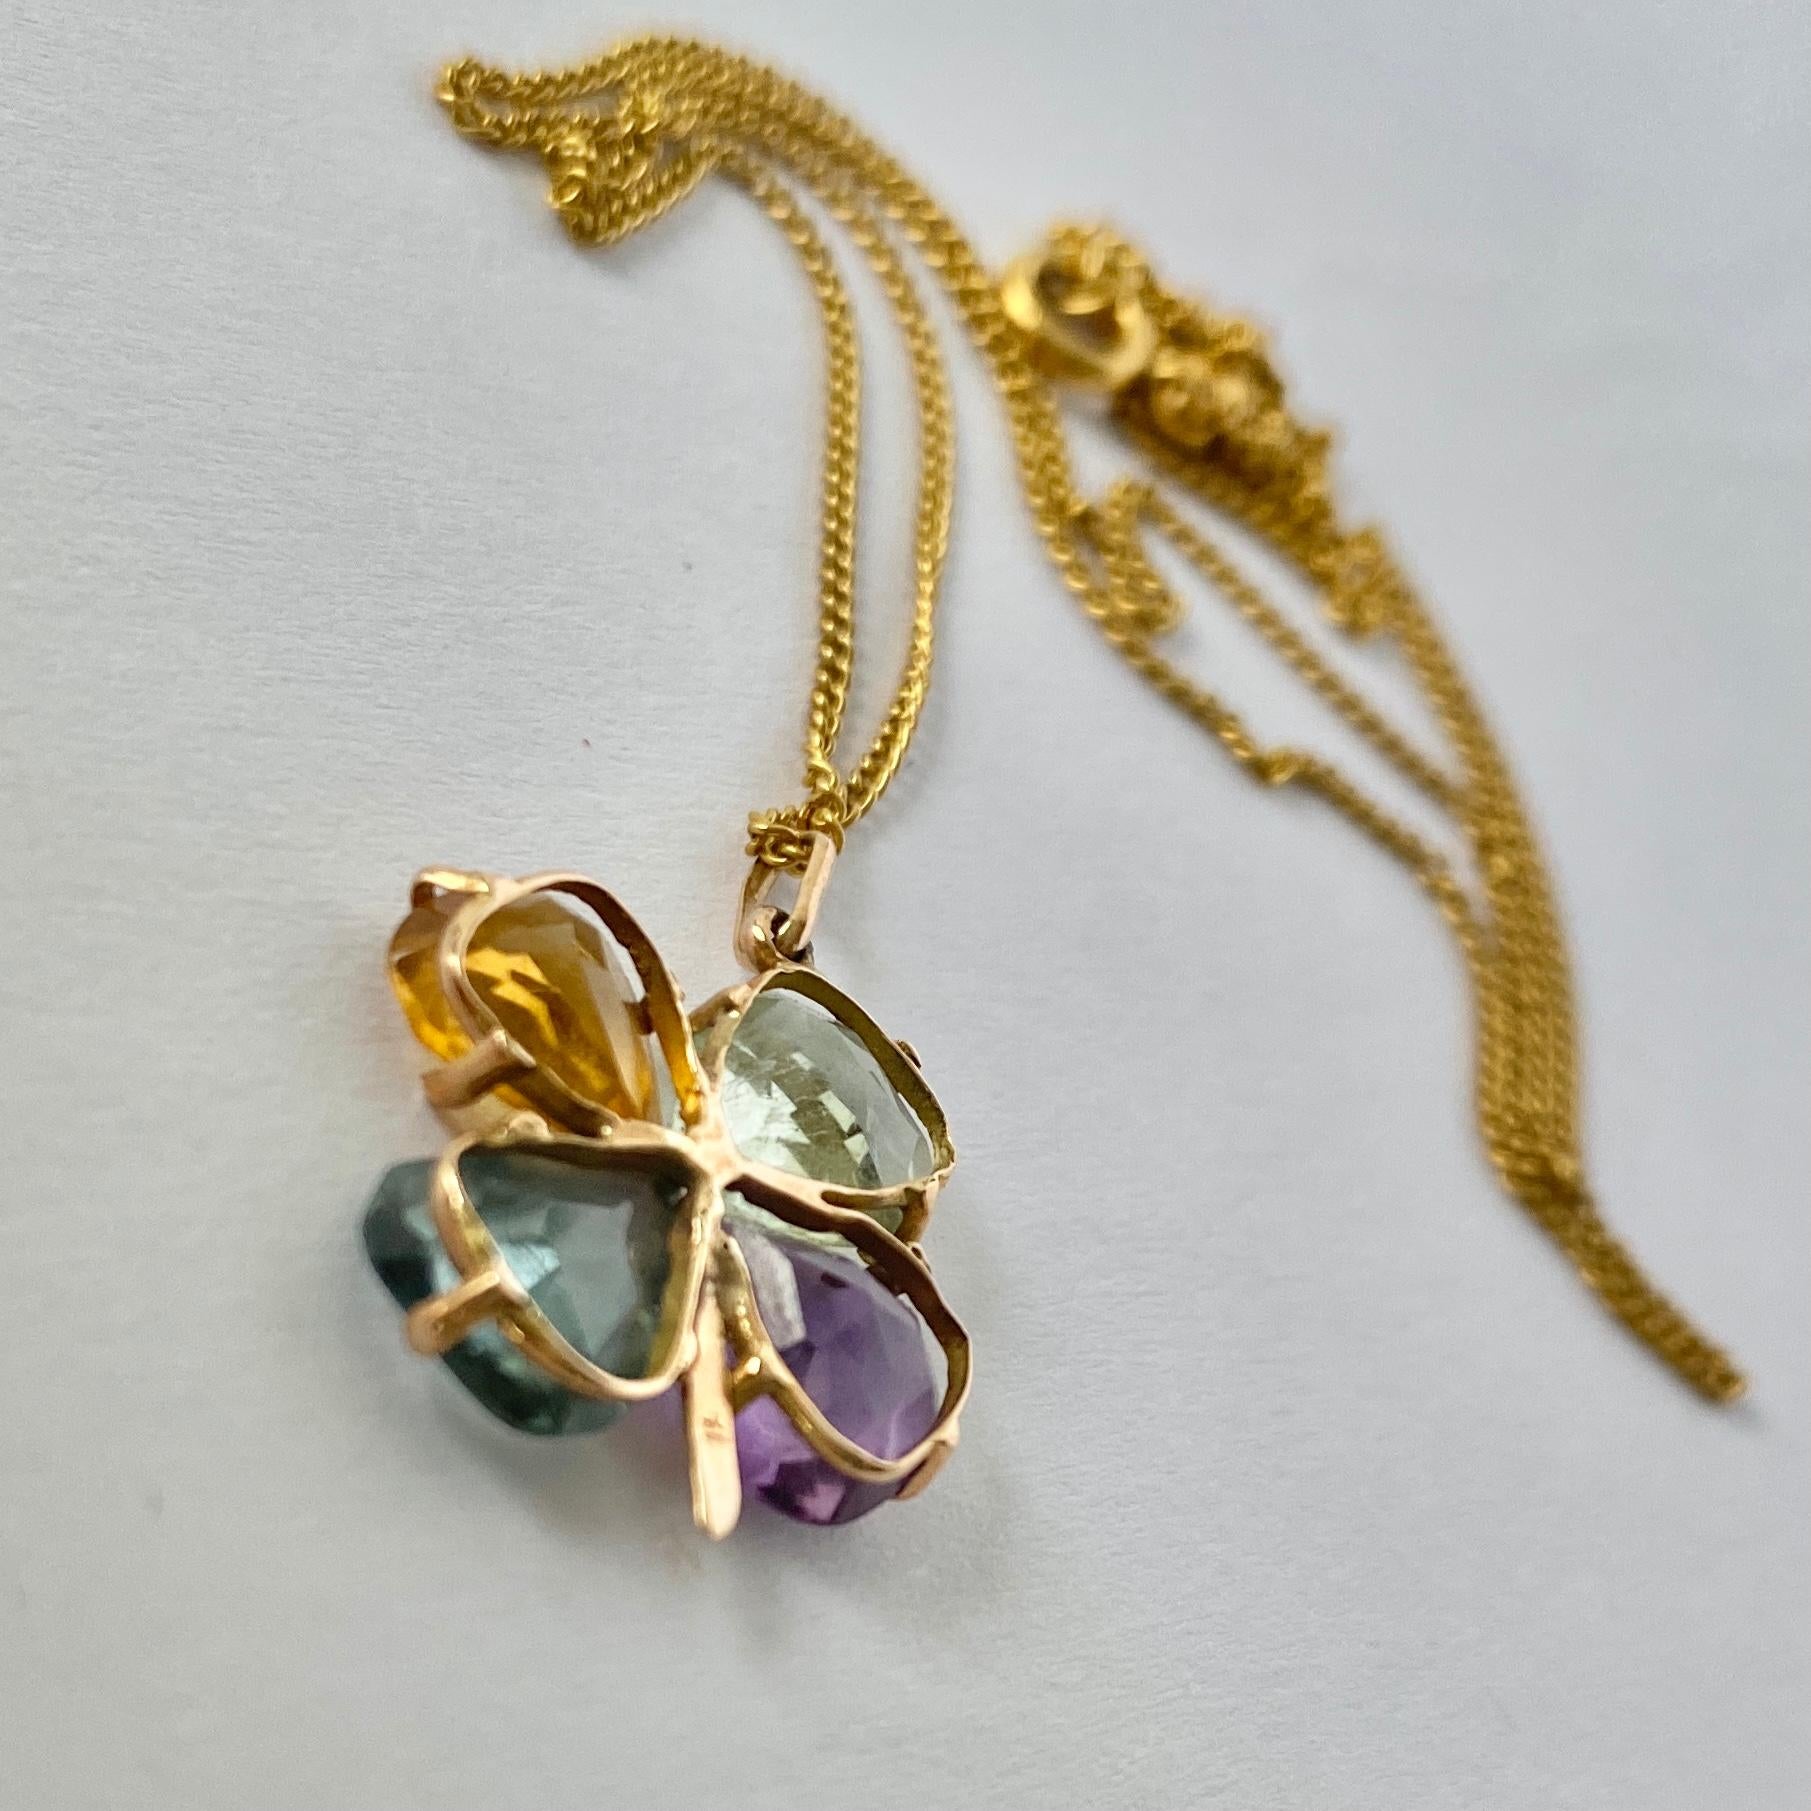 This stunning four leaf clover holds a petal shaped citrine, topaz, quartz and amethyst. The pendant and chain are modelled in 18ct gold. 

Chain Length: 47cm
Pendant Dimensions: 17x16mm

Weight: 3.4g